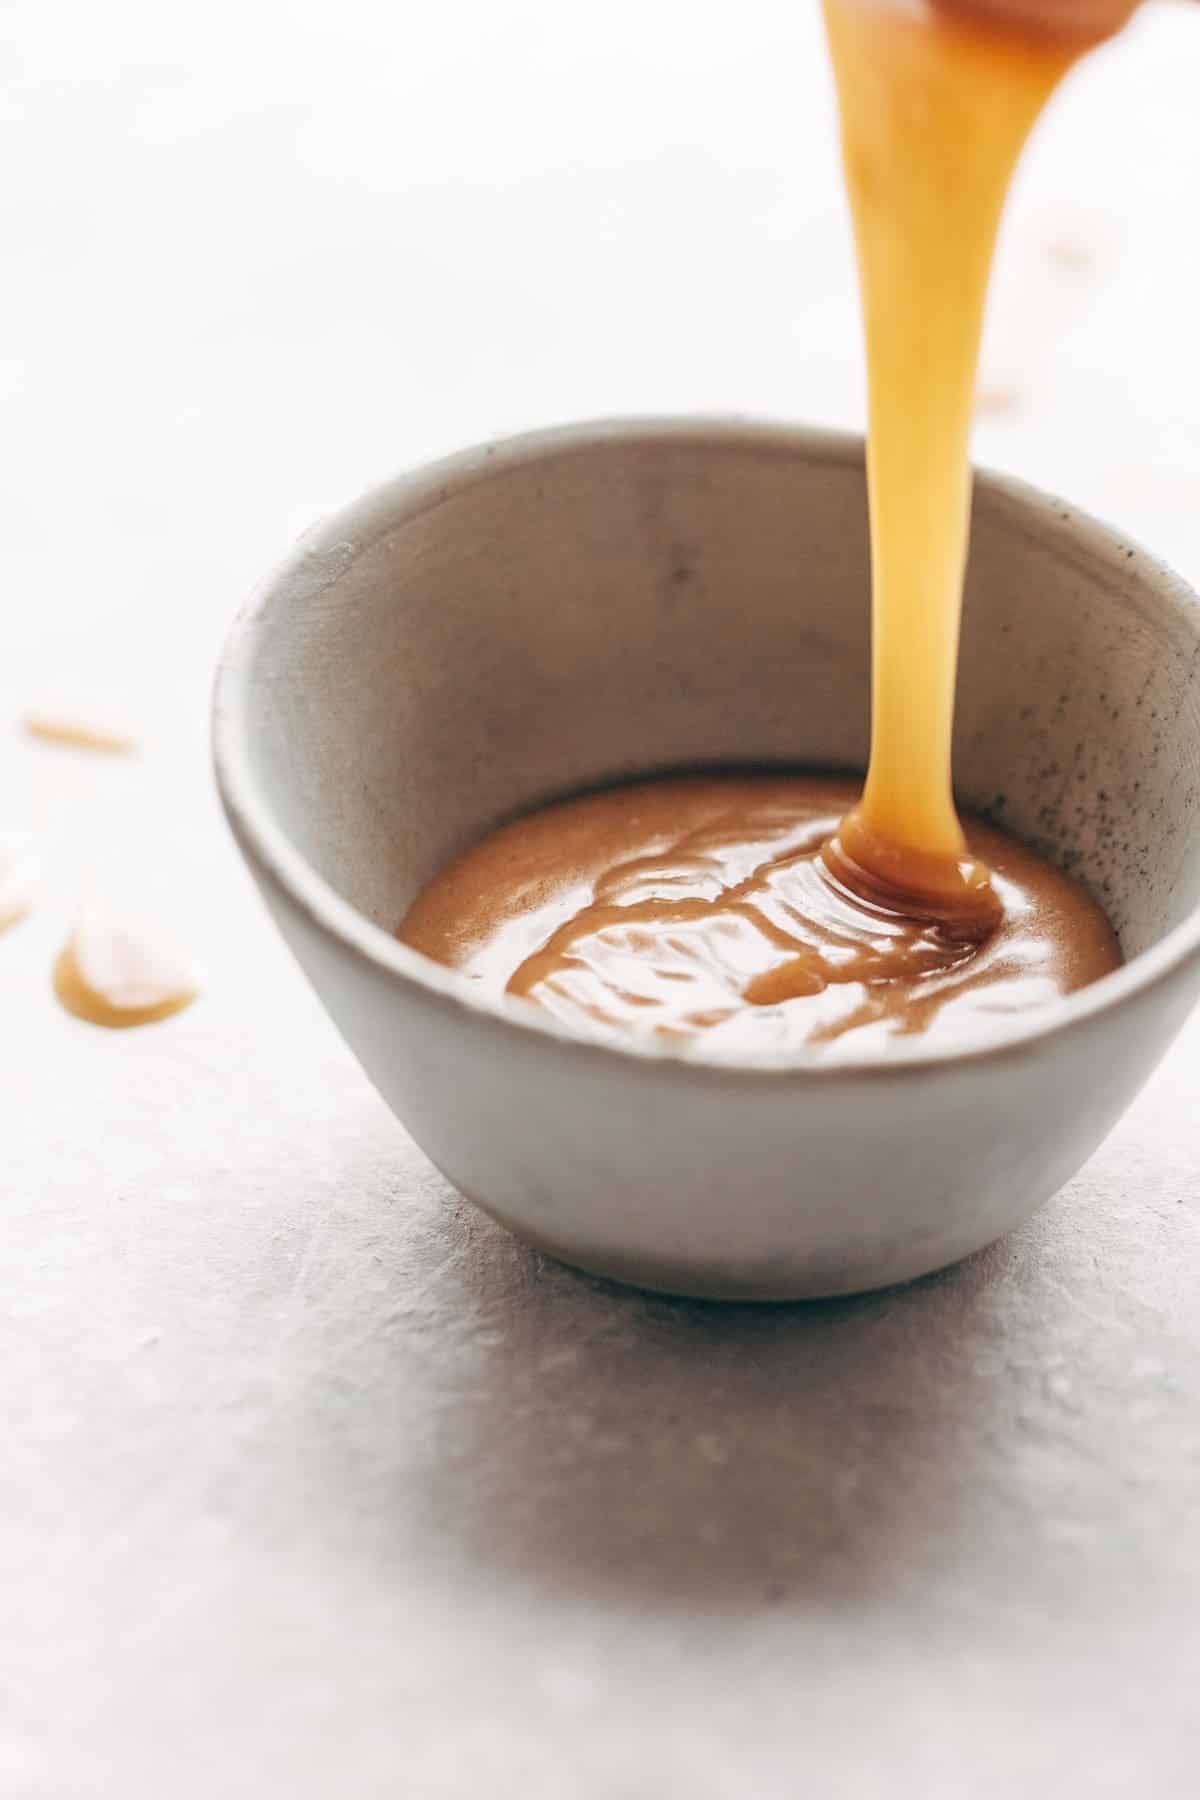 Magic Vegan Caramel Sauce in a dish with a drizzle.